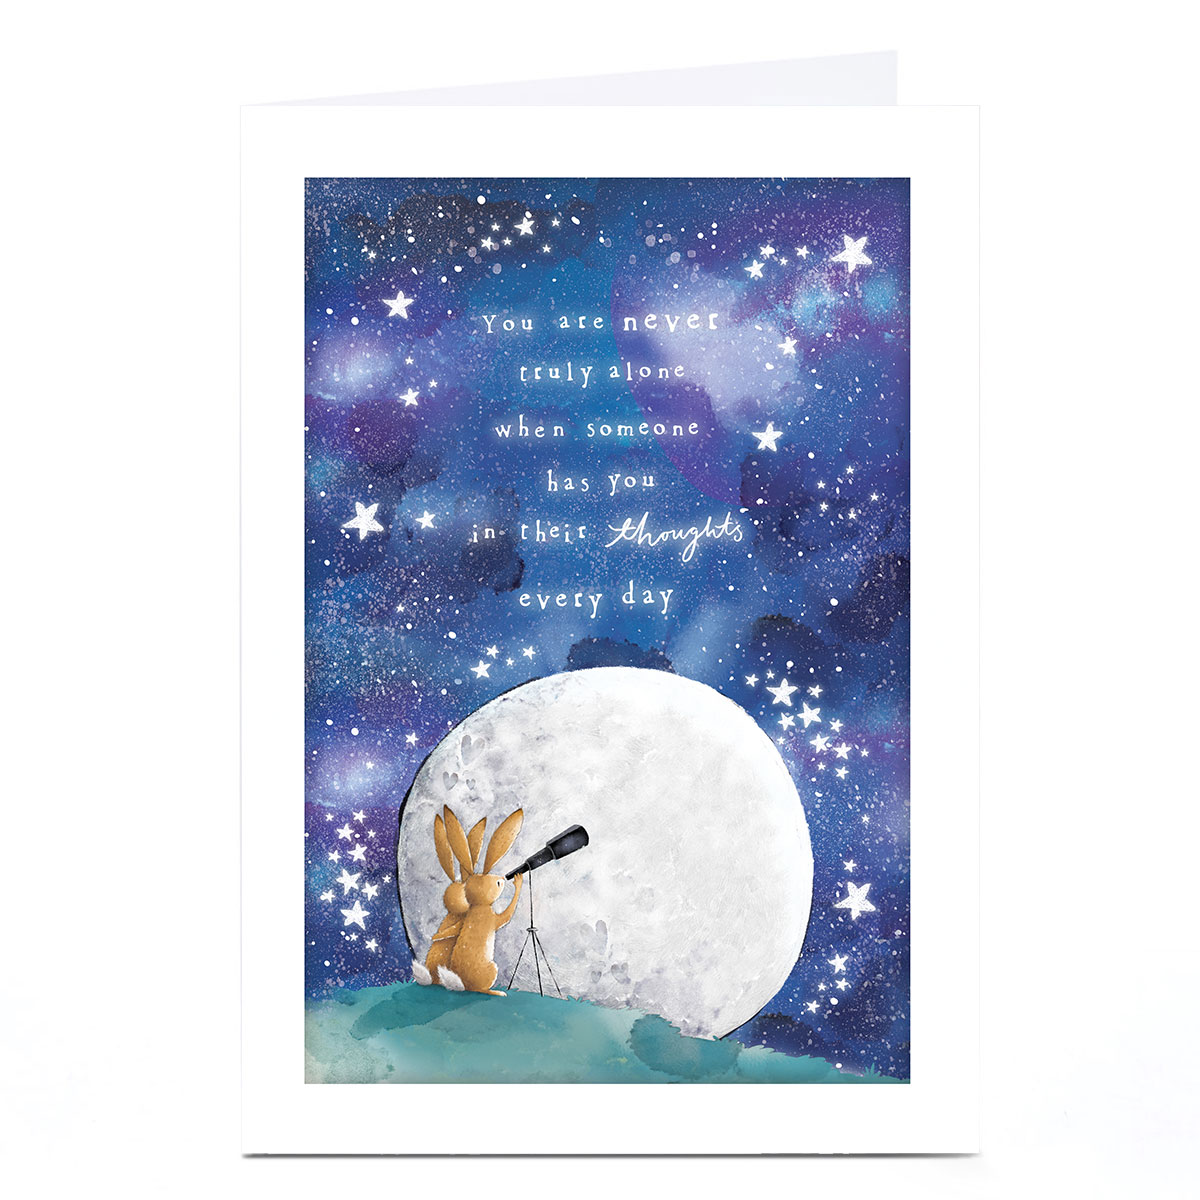 Personalised Card - Has You In Their Thoughts